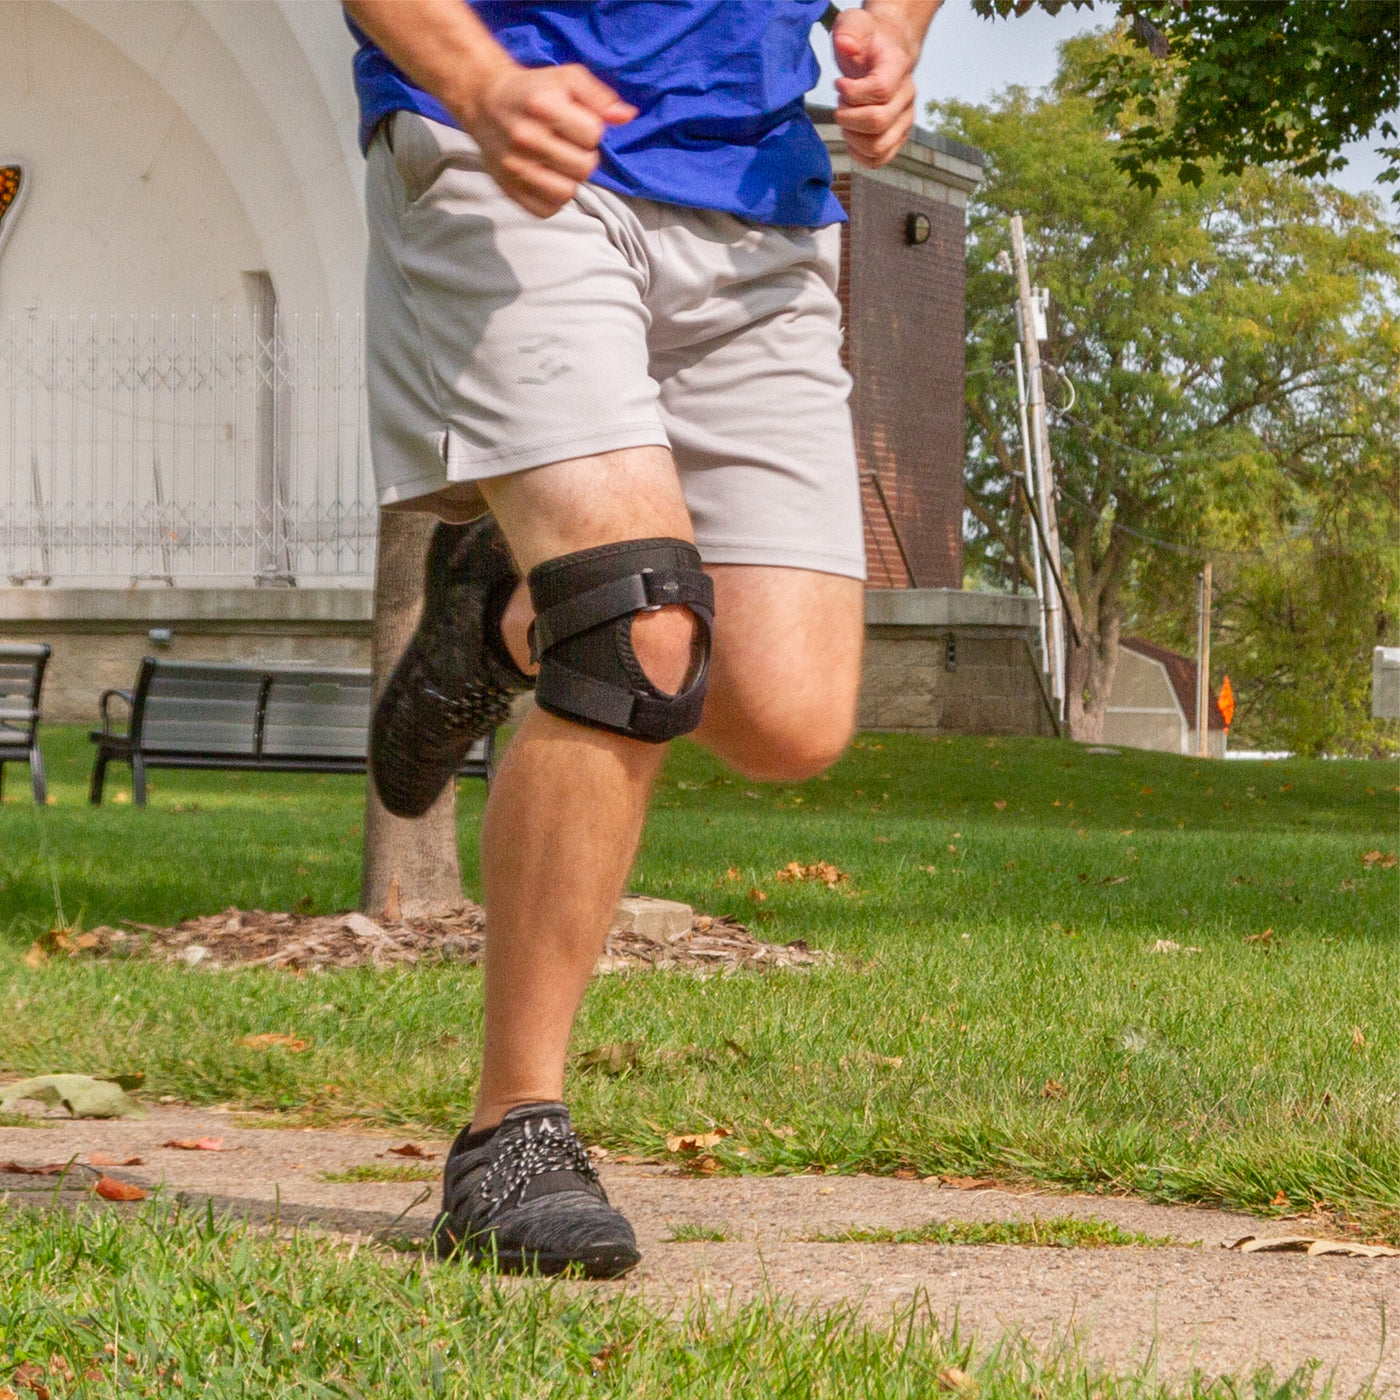 our short black knee brace has a patella stabilizer that makes running comfortable